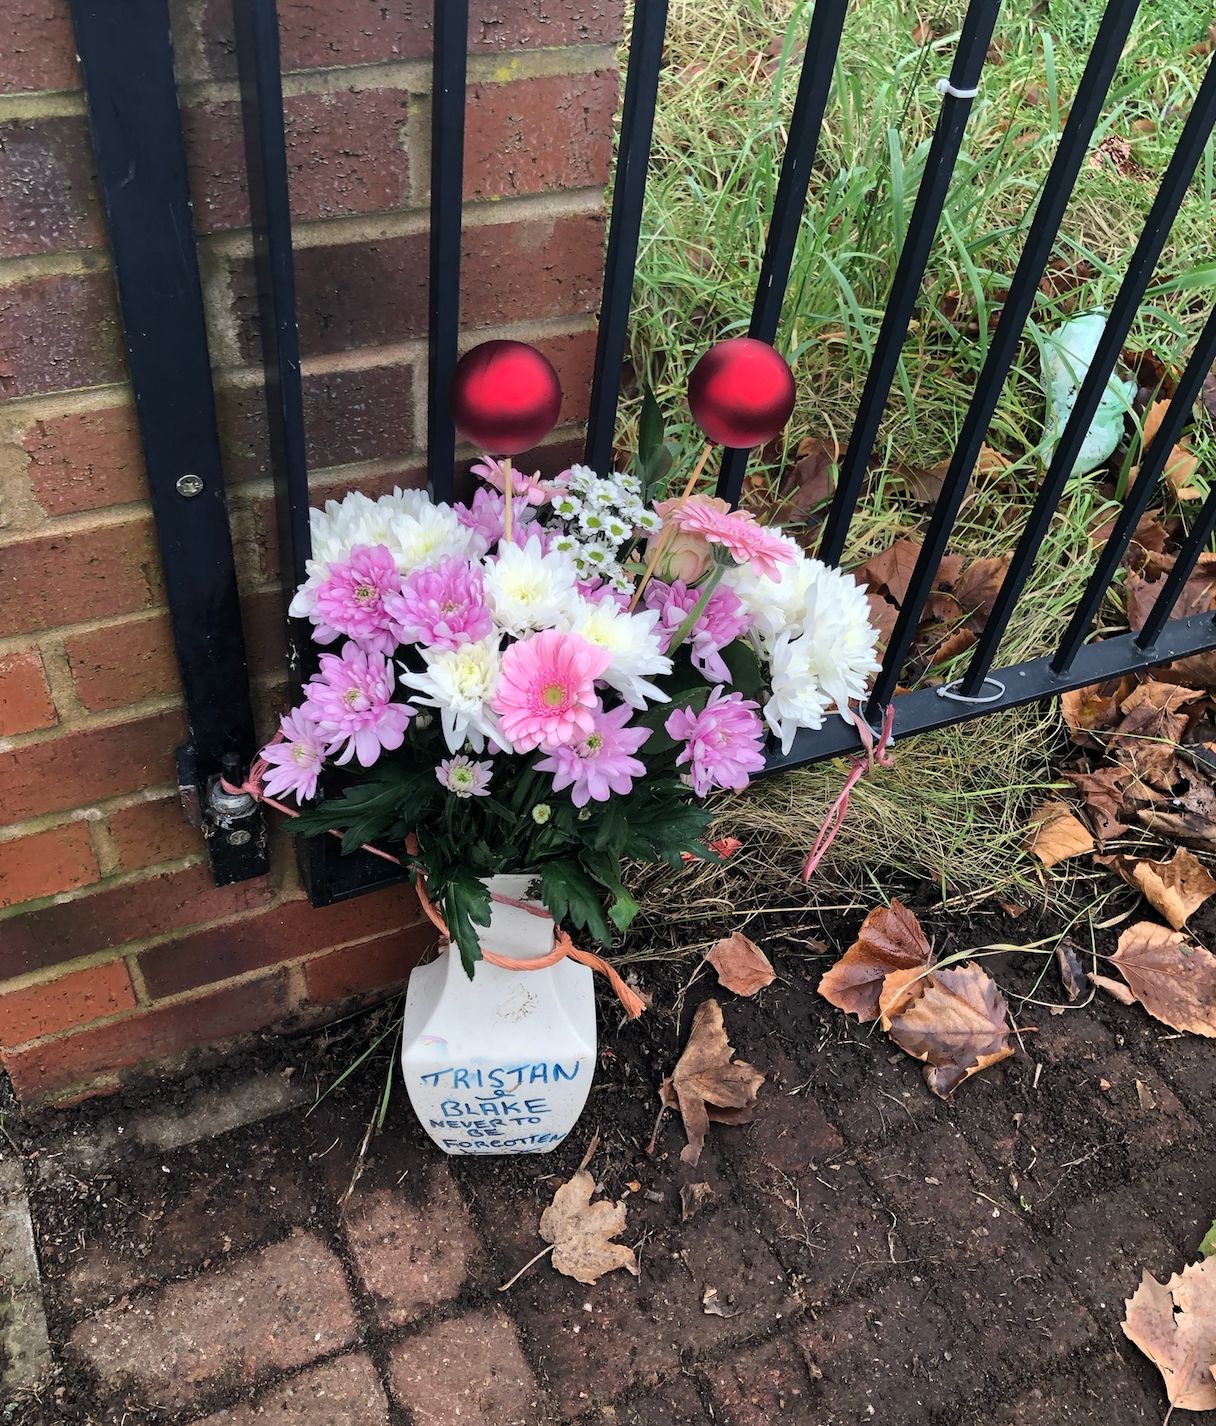 A vase of flowers outside the house